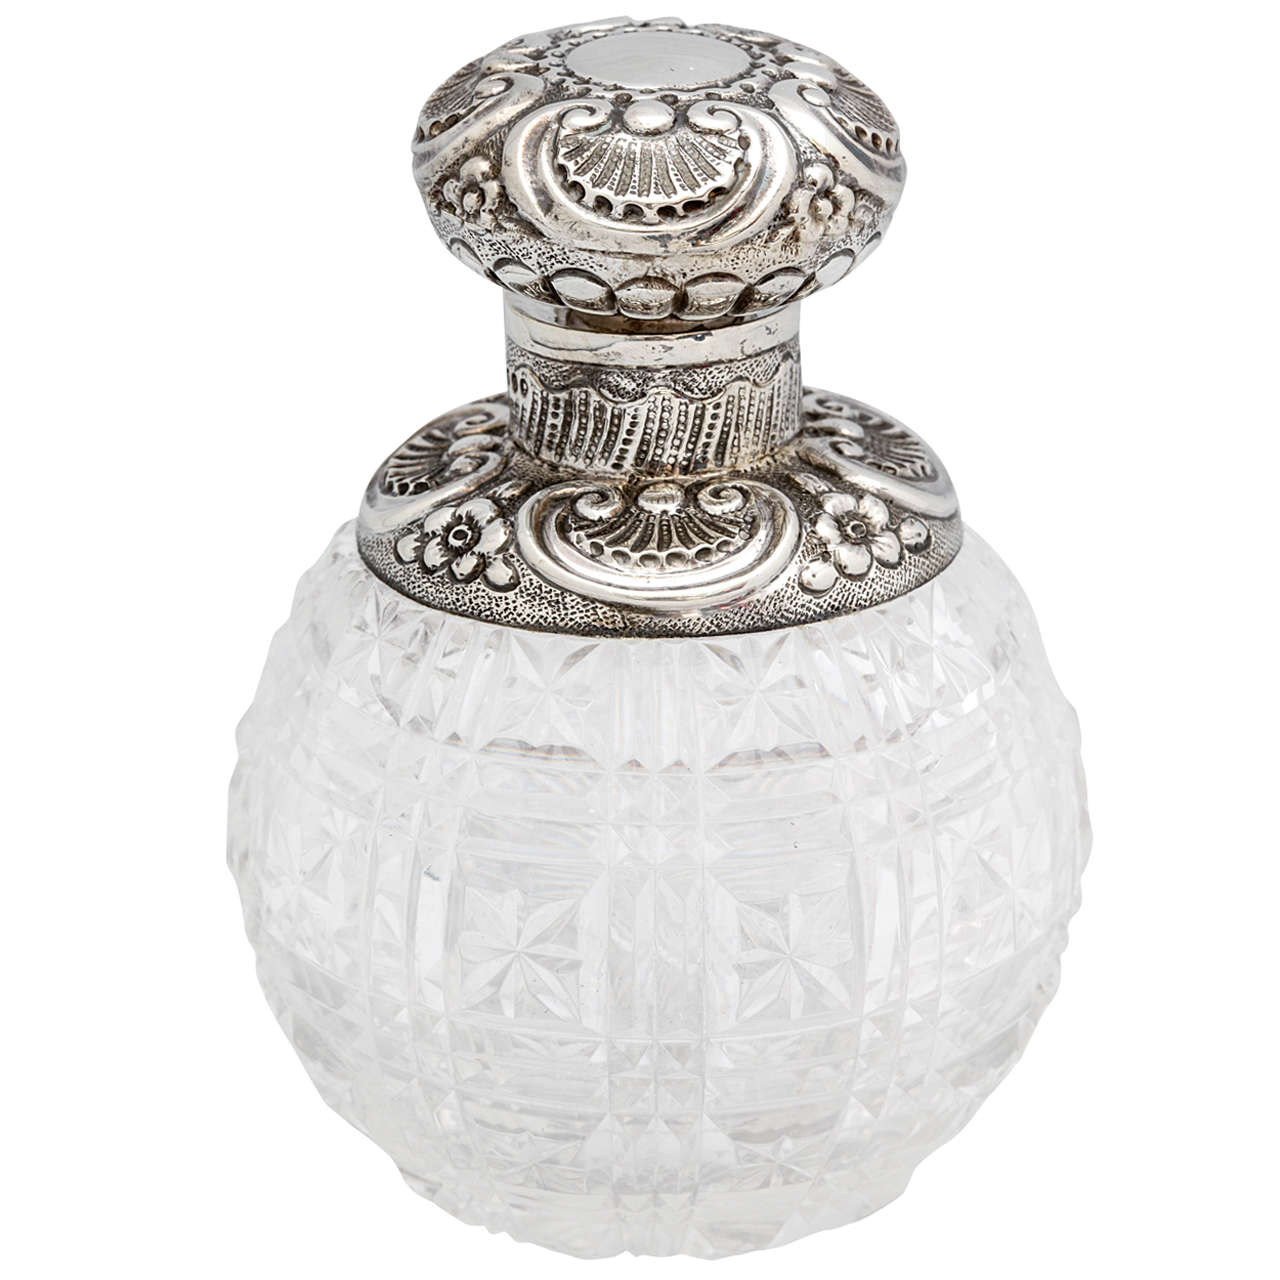 Sterling Silver-Mounted Cut Crystal Perfume Bottle